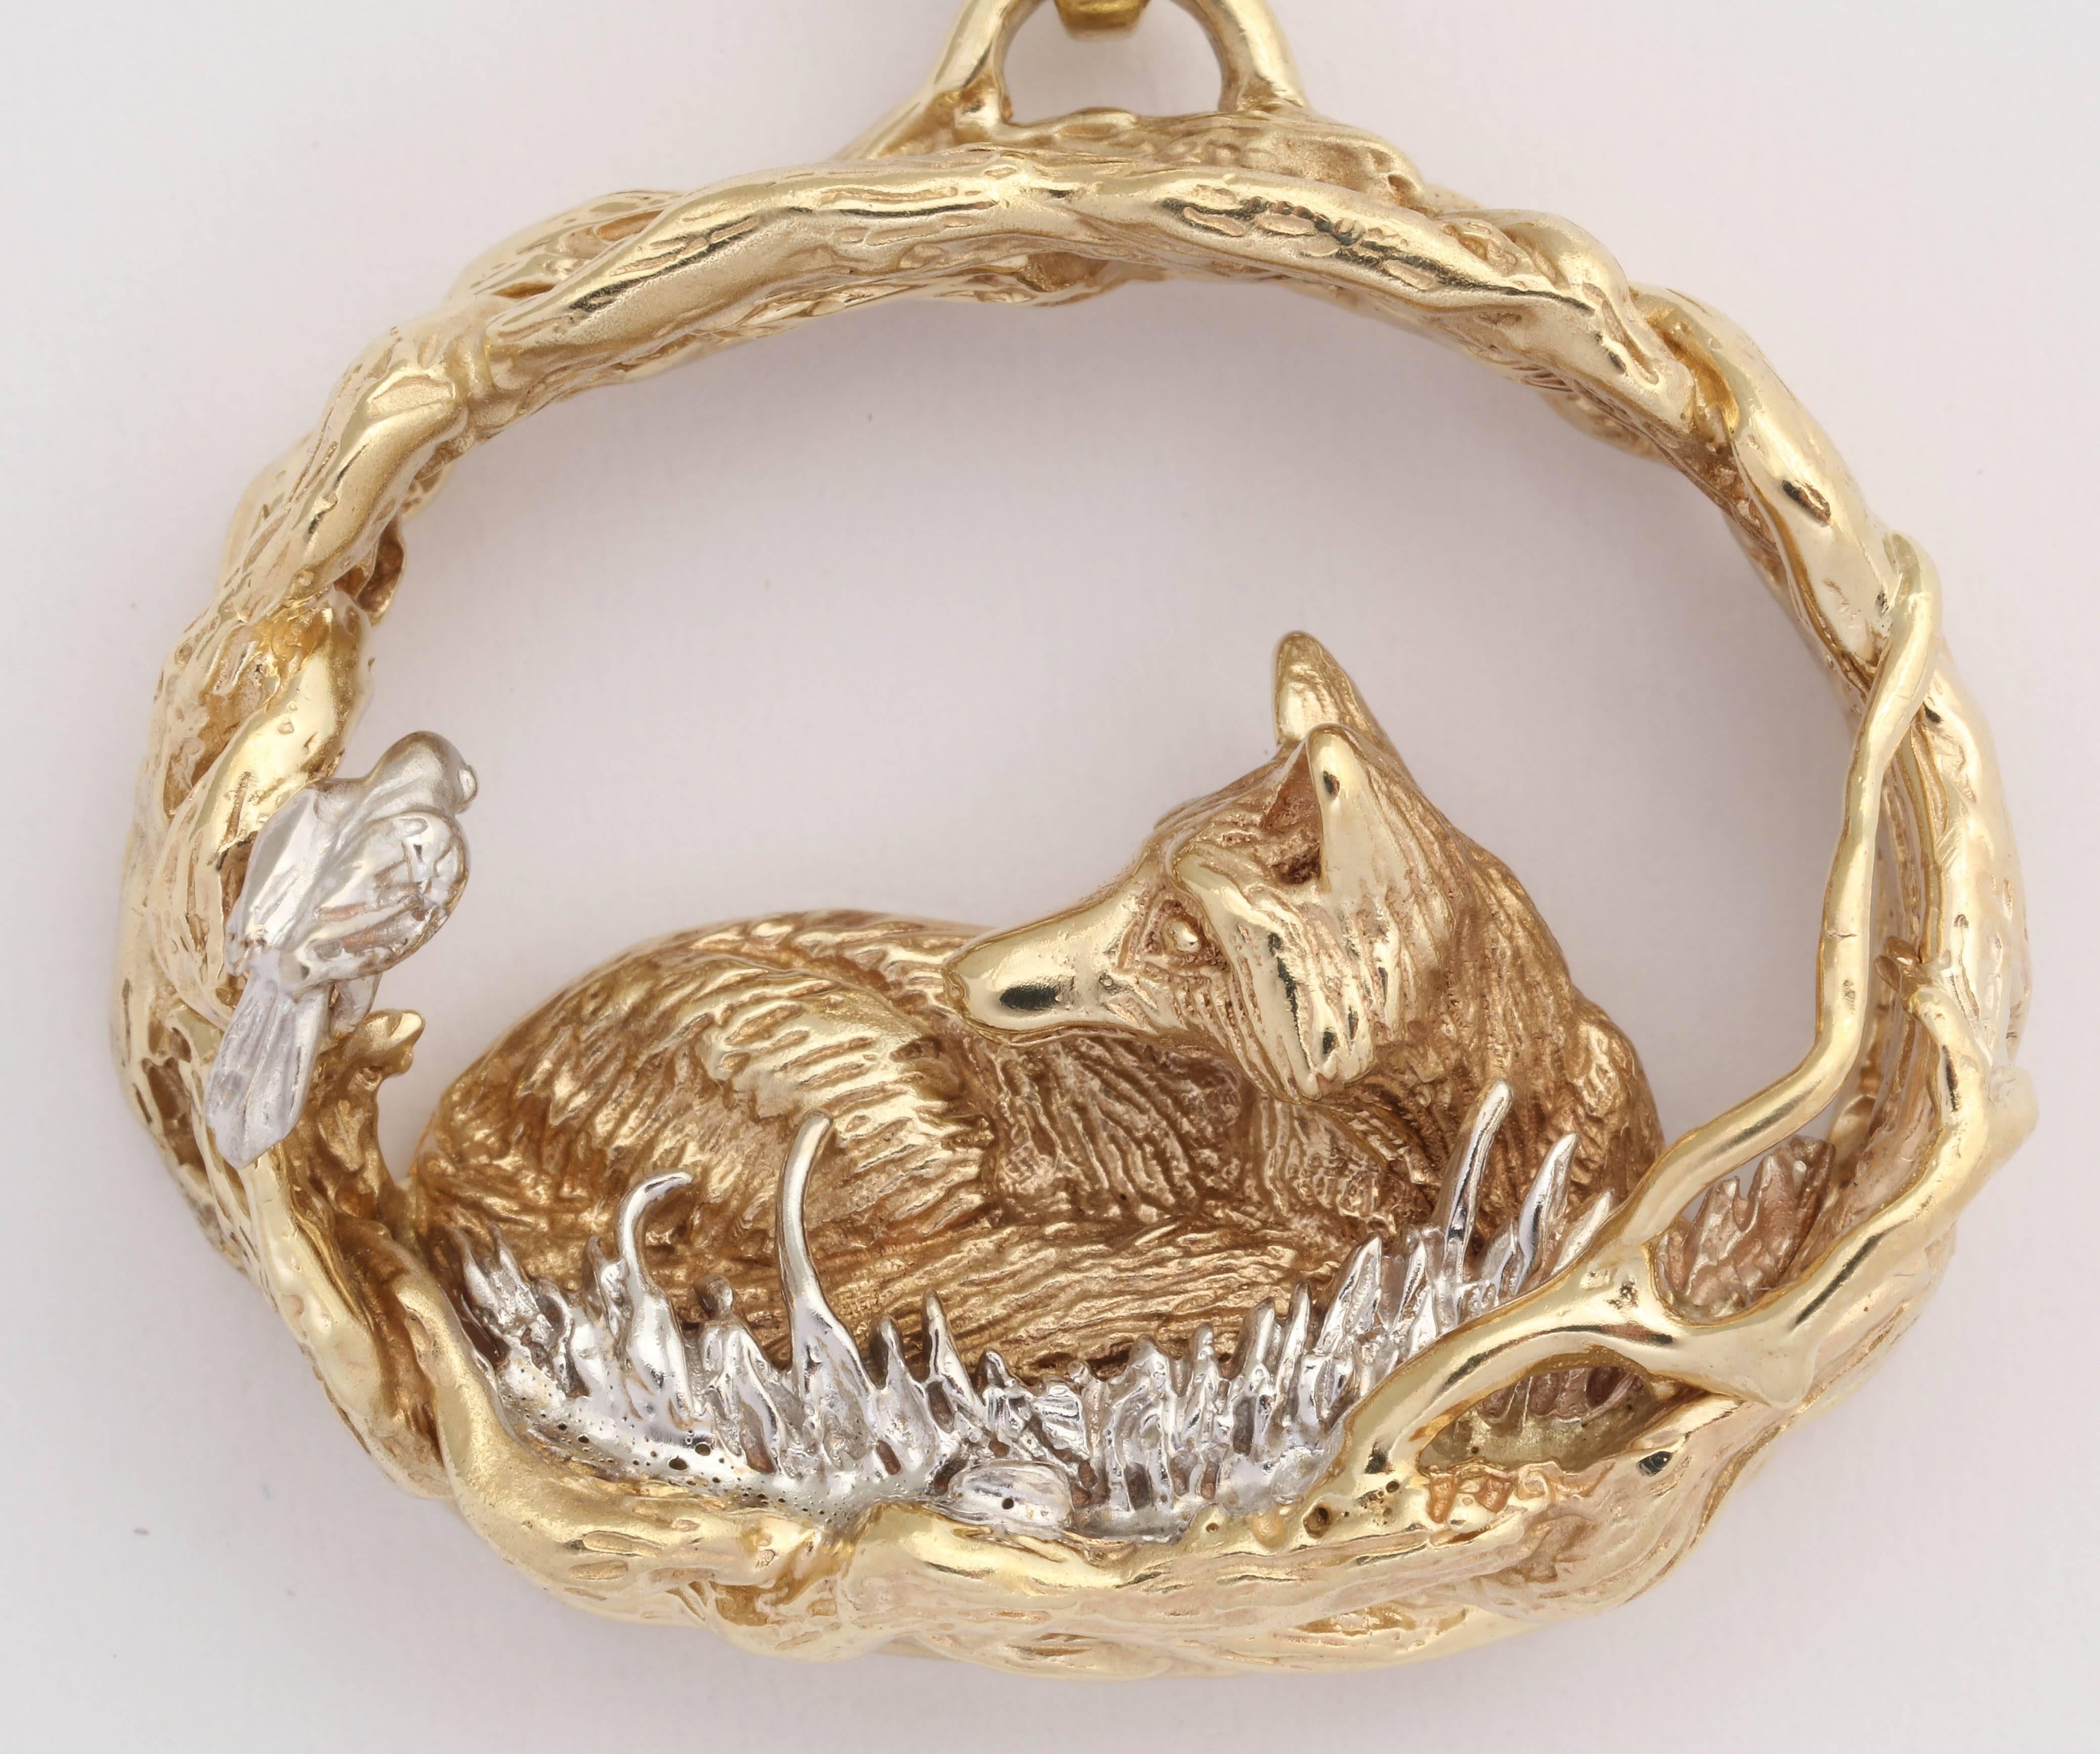 The beautifully carved fox is curled up on a bed of white gold grass with a bird friend stopping by to say Hello. The fox is surrounded by intertwined gold branches.  This is 2/100 limited edition made by Darren K. Moore in Phoenix AZ.